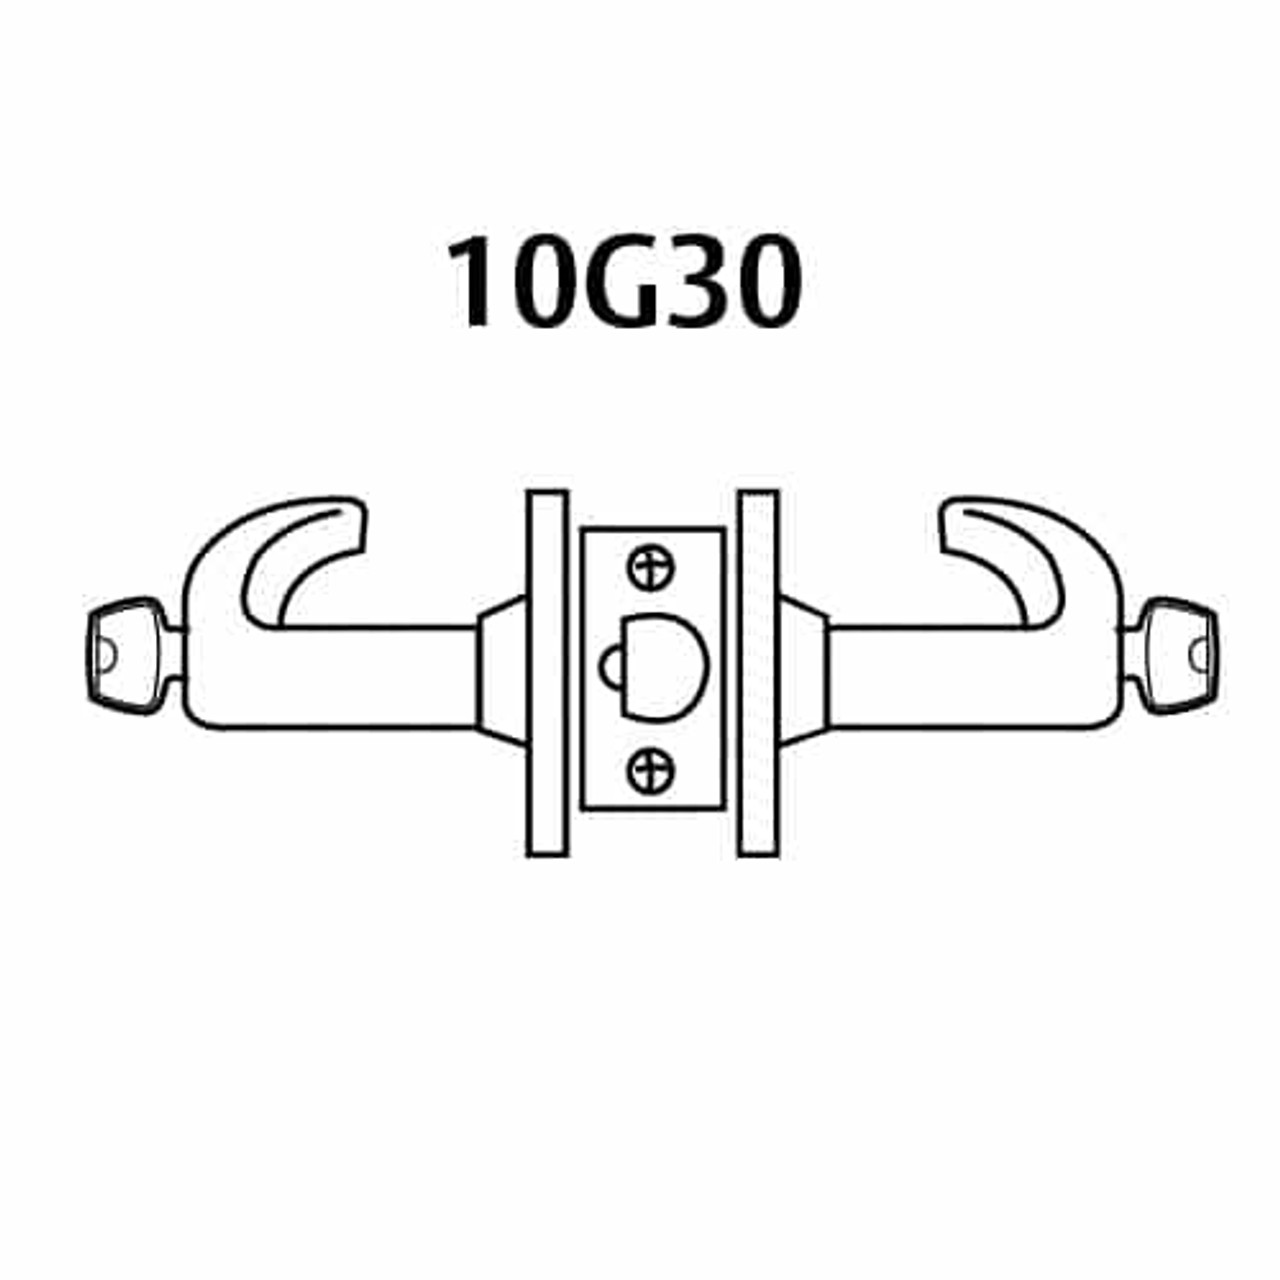 2860-10G30-GL-26 Sargent 10 Line Cylindrical Communicating Locks with L Lever Design and G Rose Prepped for LFIC in Bright Chrome